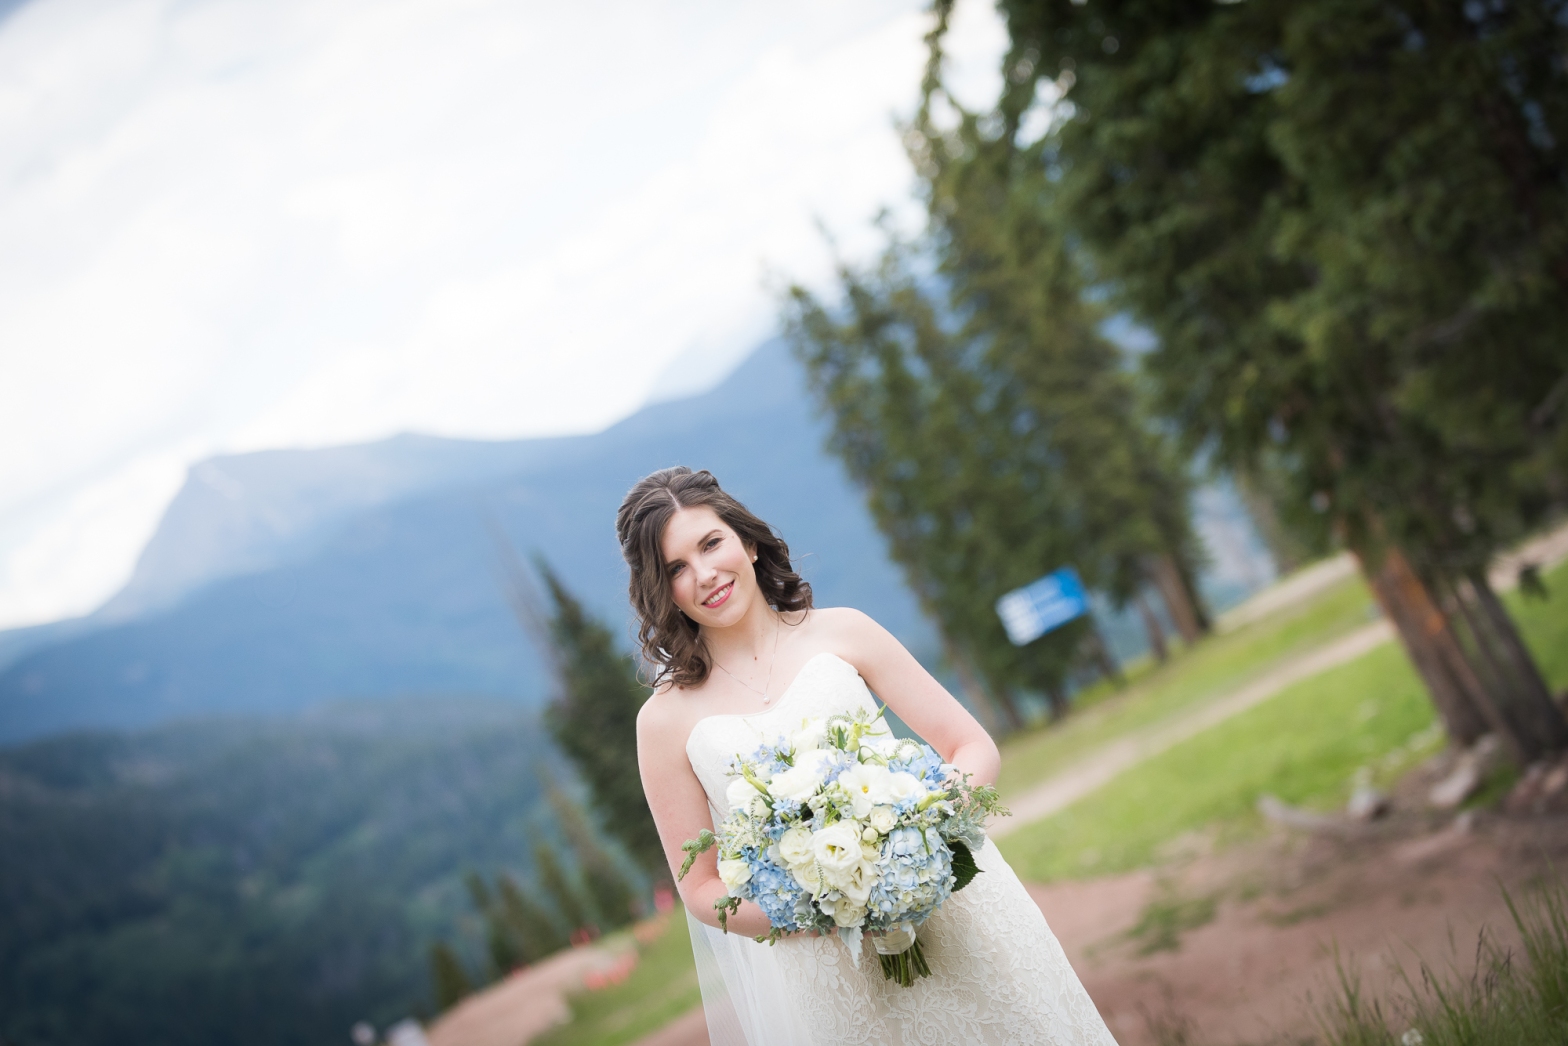 Mountain Wedding, Mountain Bride, Summer Wedding, Outdoor Wedding, Outdoor Ceremony, Rollers and Rouge, Bridal Portraits